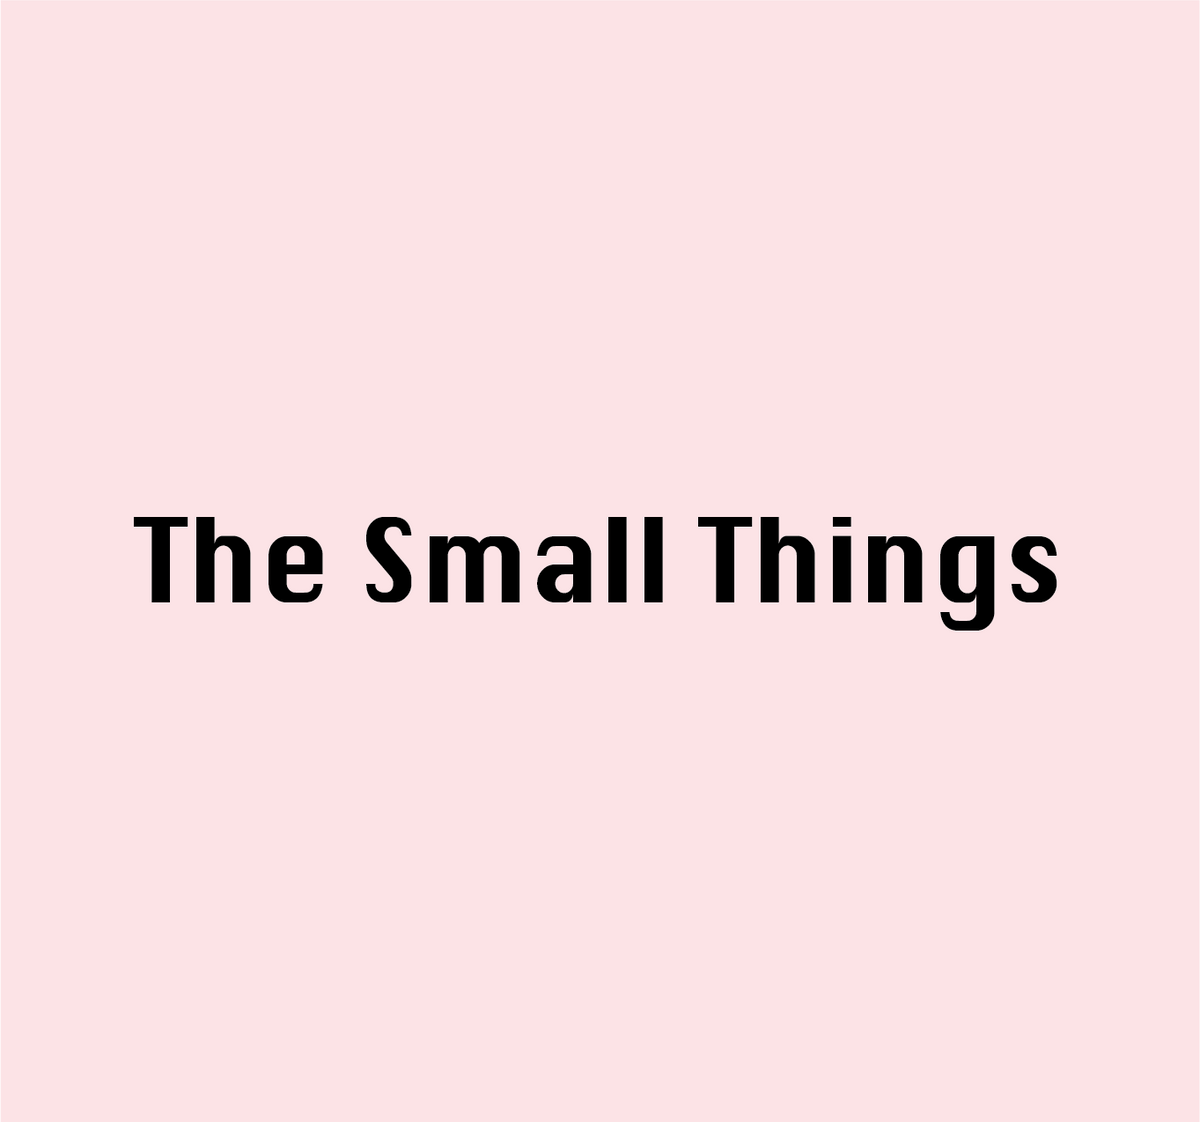 The Small Things